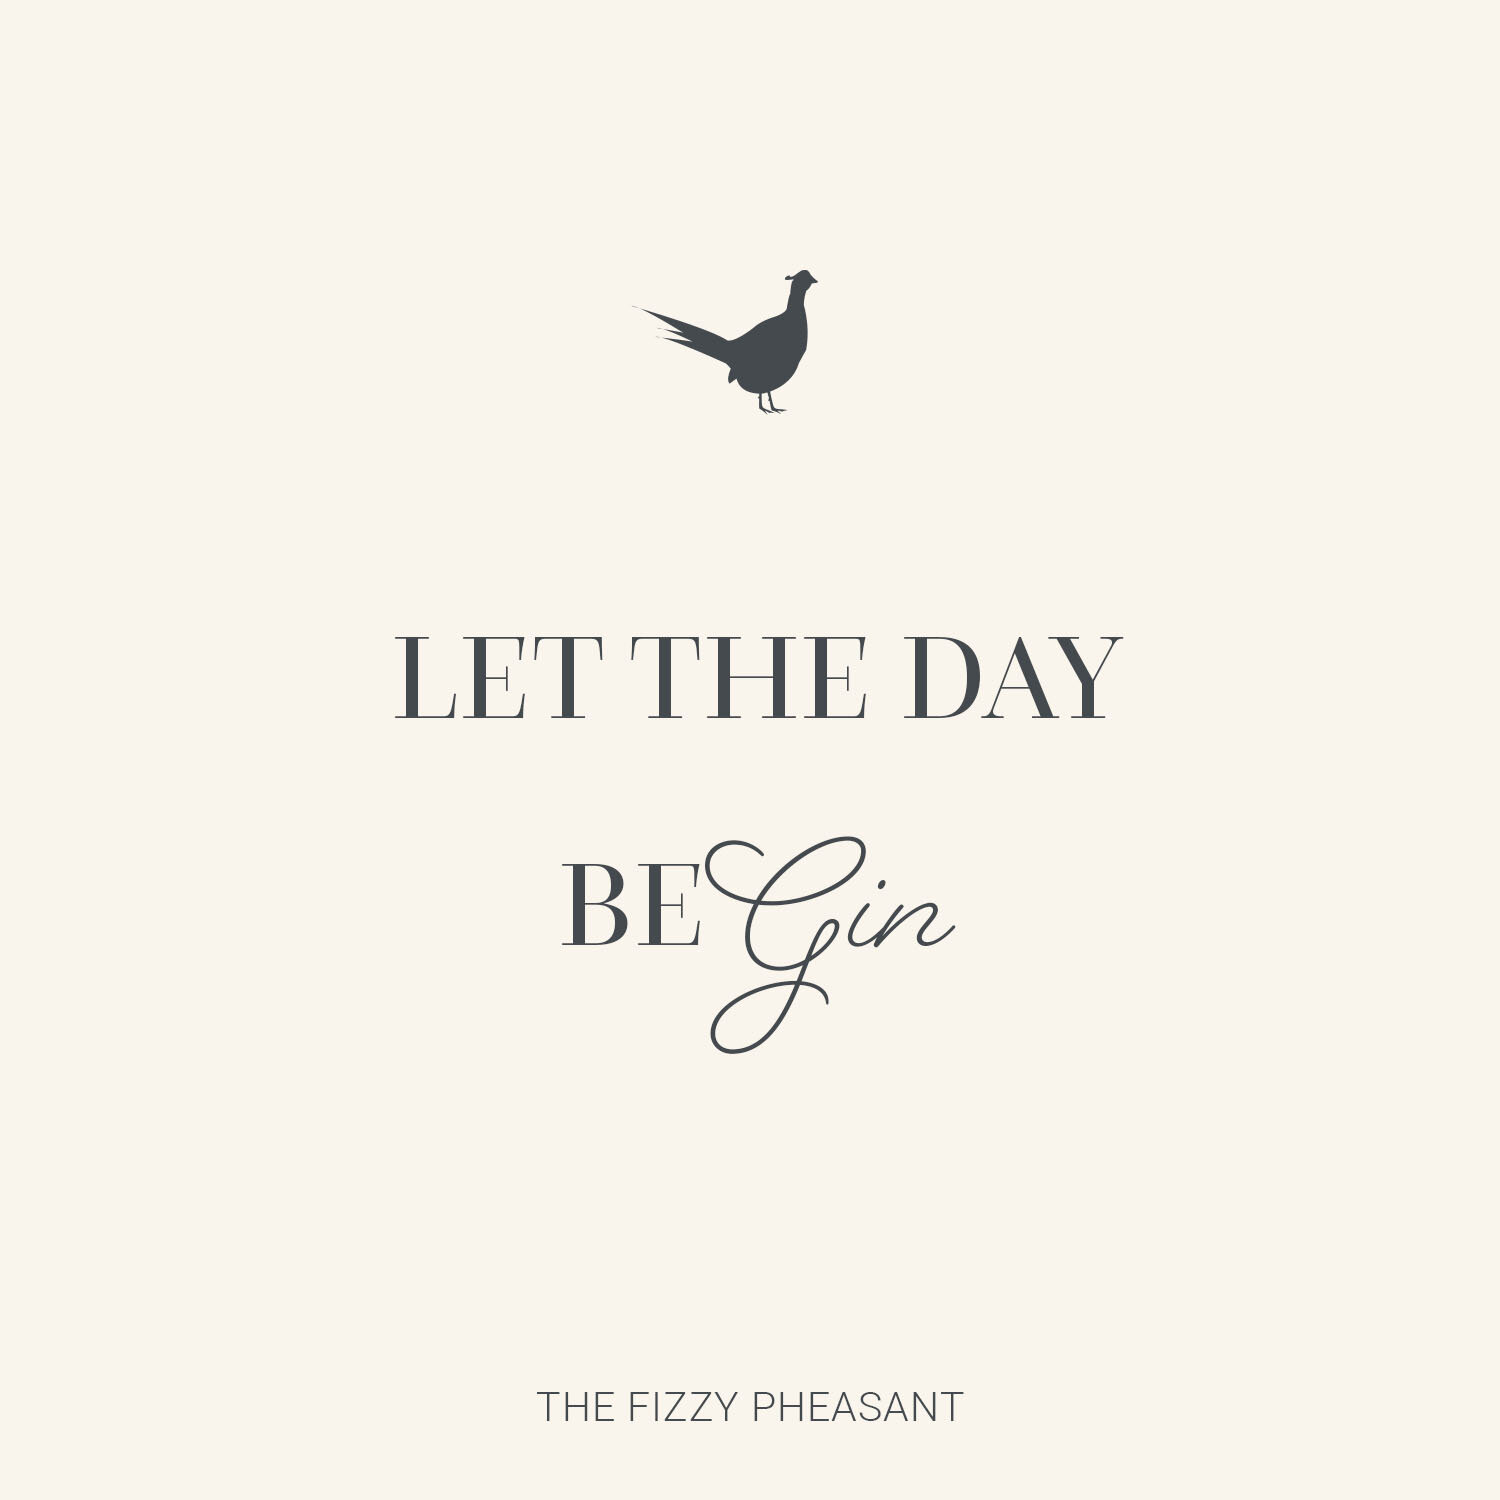 LET THE DAY BEGIN QUOTE - The Fizzy Pheasant.jpg